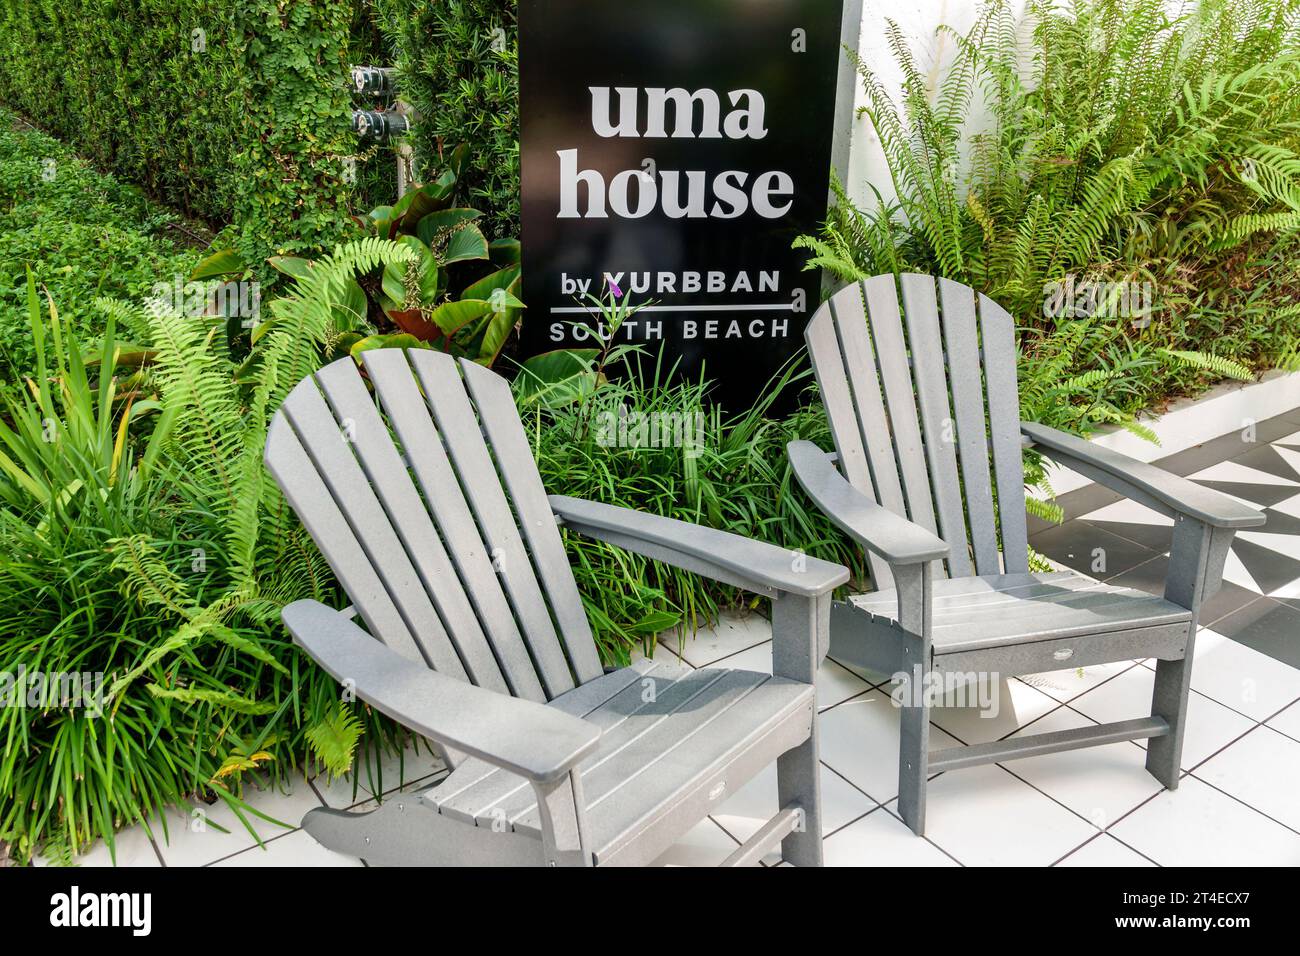 Miami Beach Florida,outside exterior,building front entrance hotel,Uma House by Yurbban sign,hotels motels businesses Stock Photo